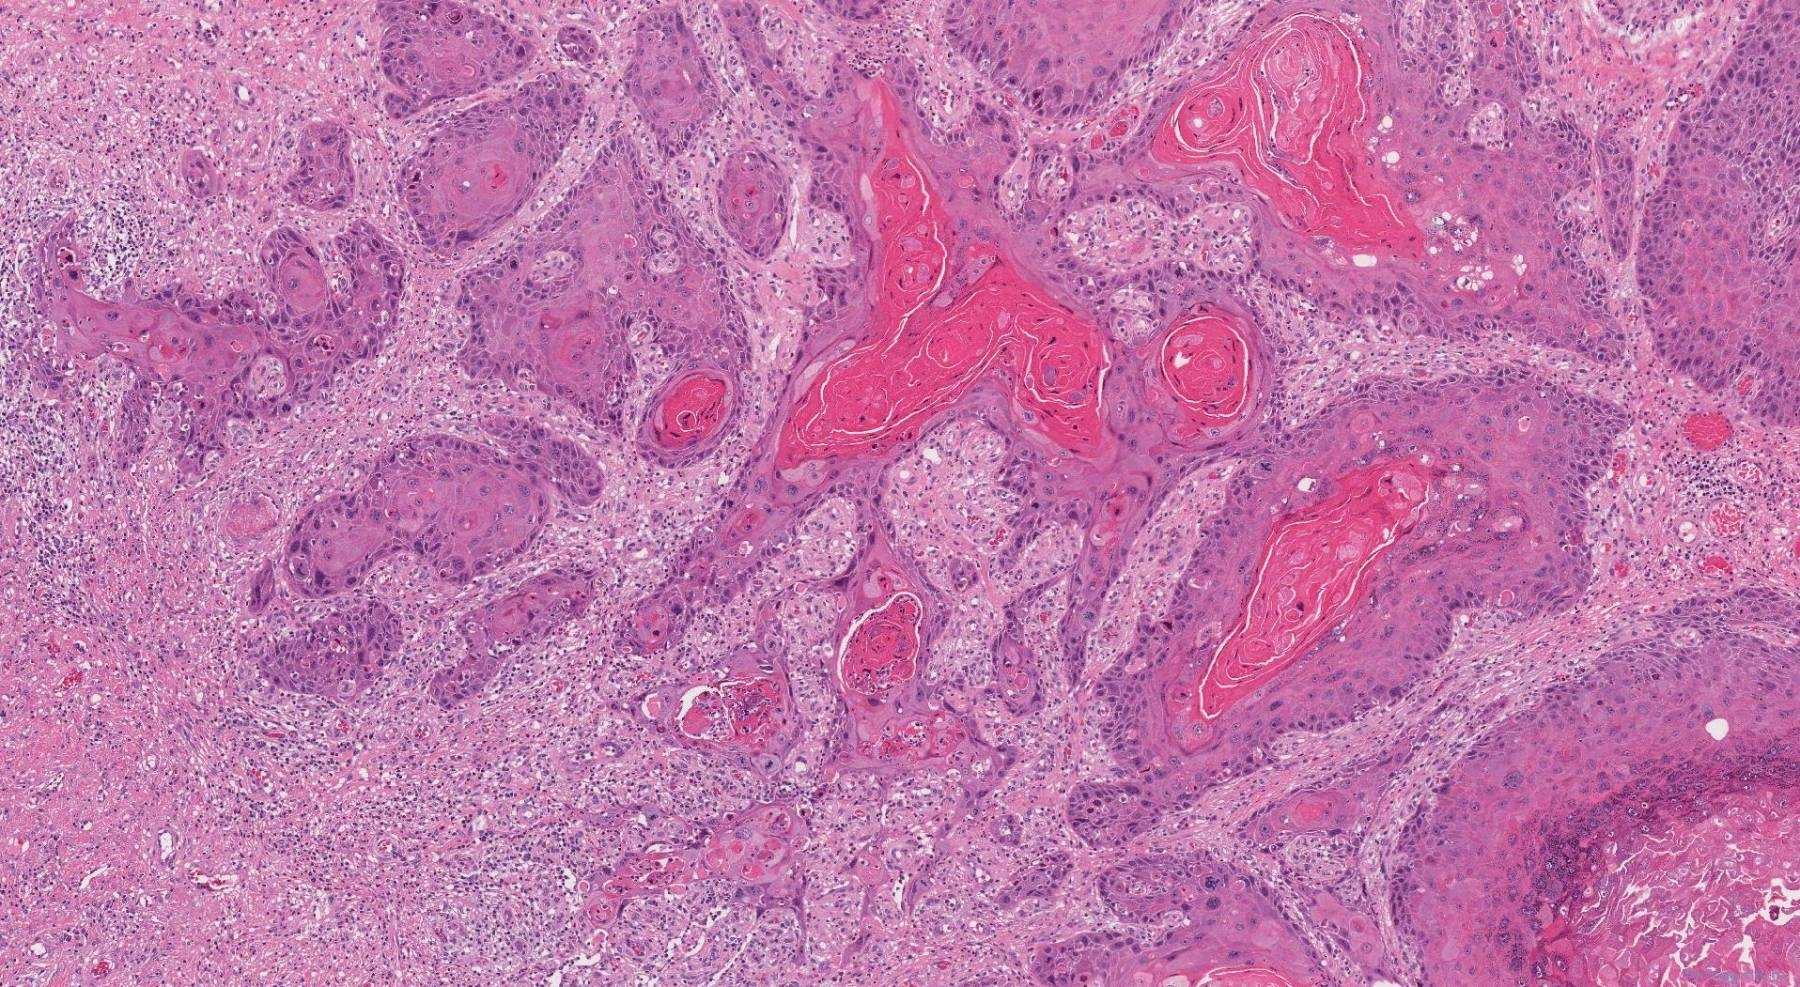 Pathologic Classification Of Squamous Cell Carcinoma Scc Of The Penis